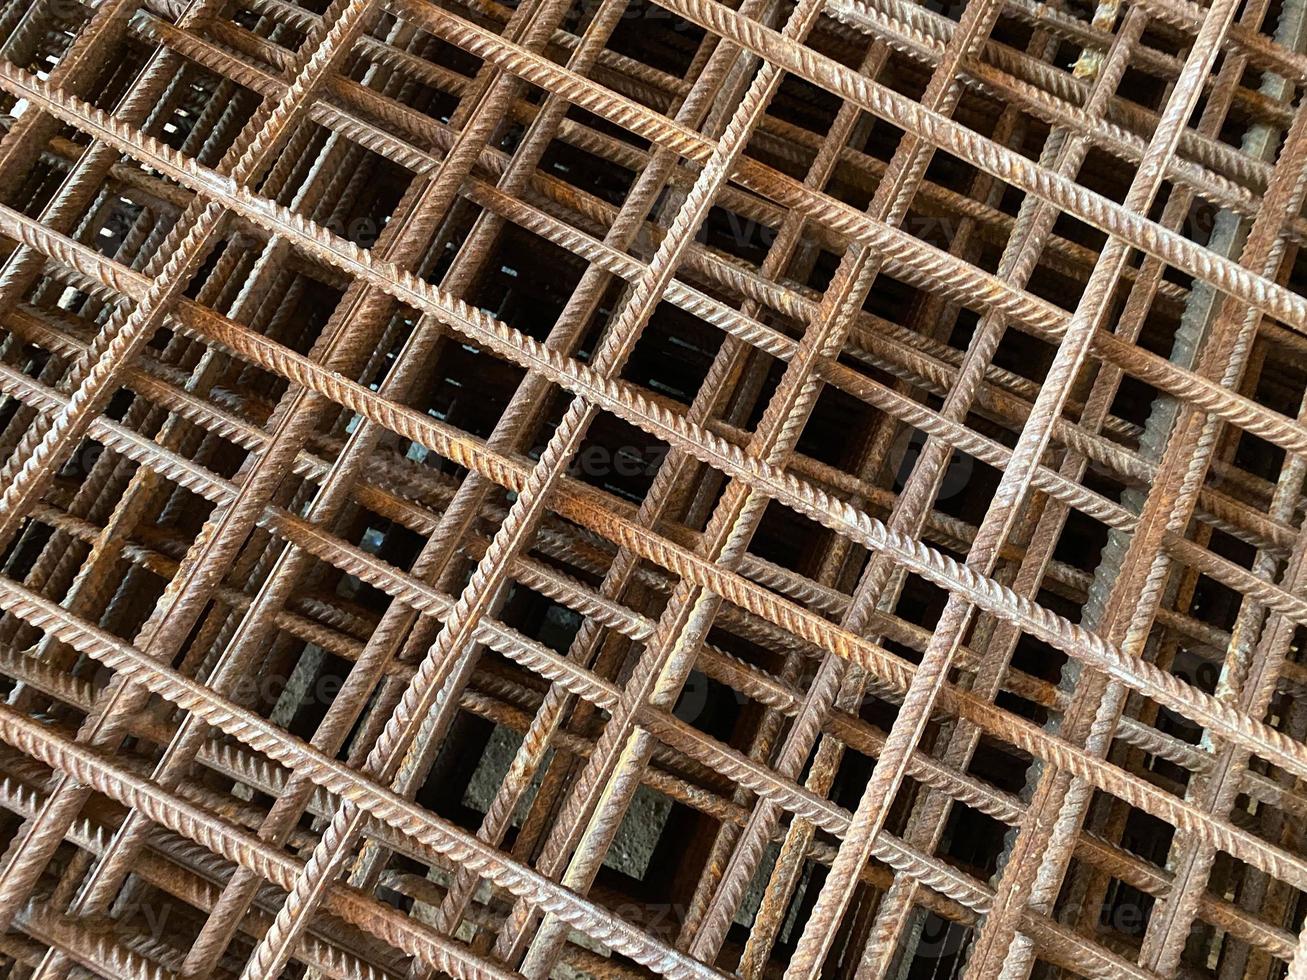 Iron rusty bars of wire reinforcement for building houses and producing industrial reinforced concrete at a construction site photo